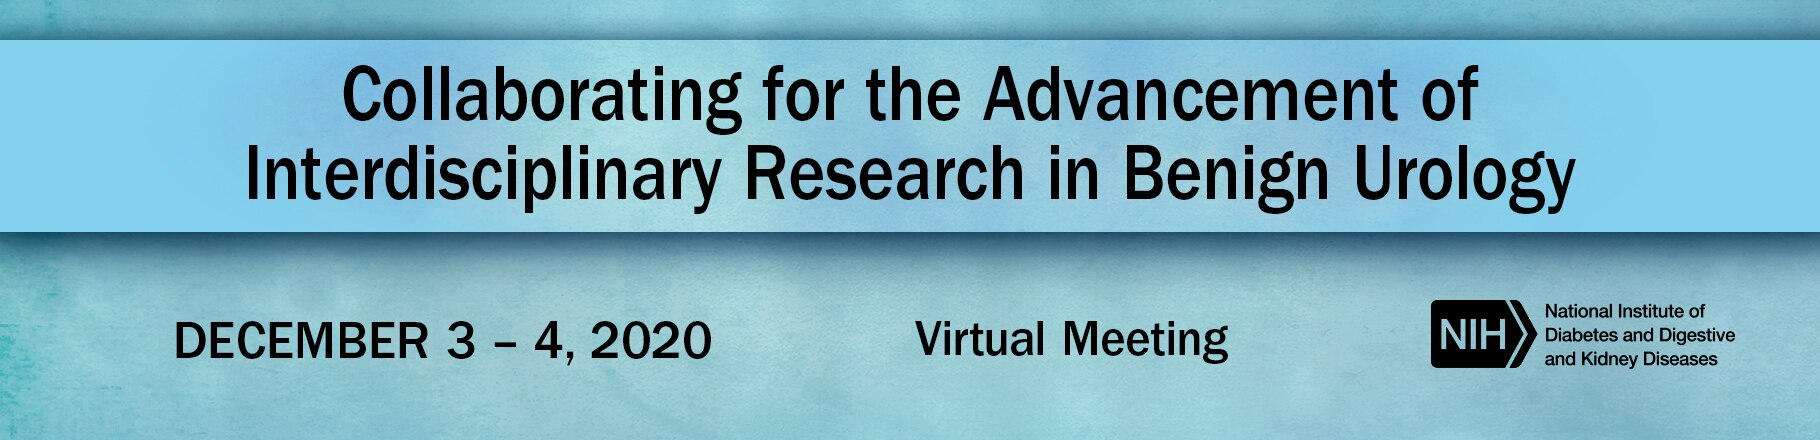 Web banner for the Collaborating for the Advancement of Interdisciplinary Research in Benign Urology (CAIRIBU) meeting